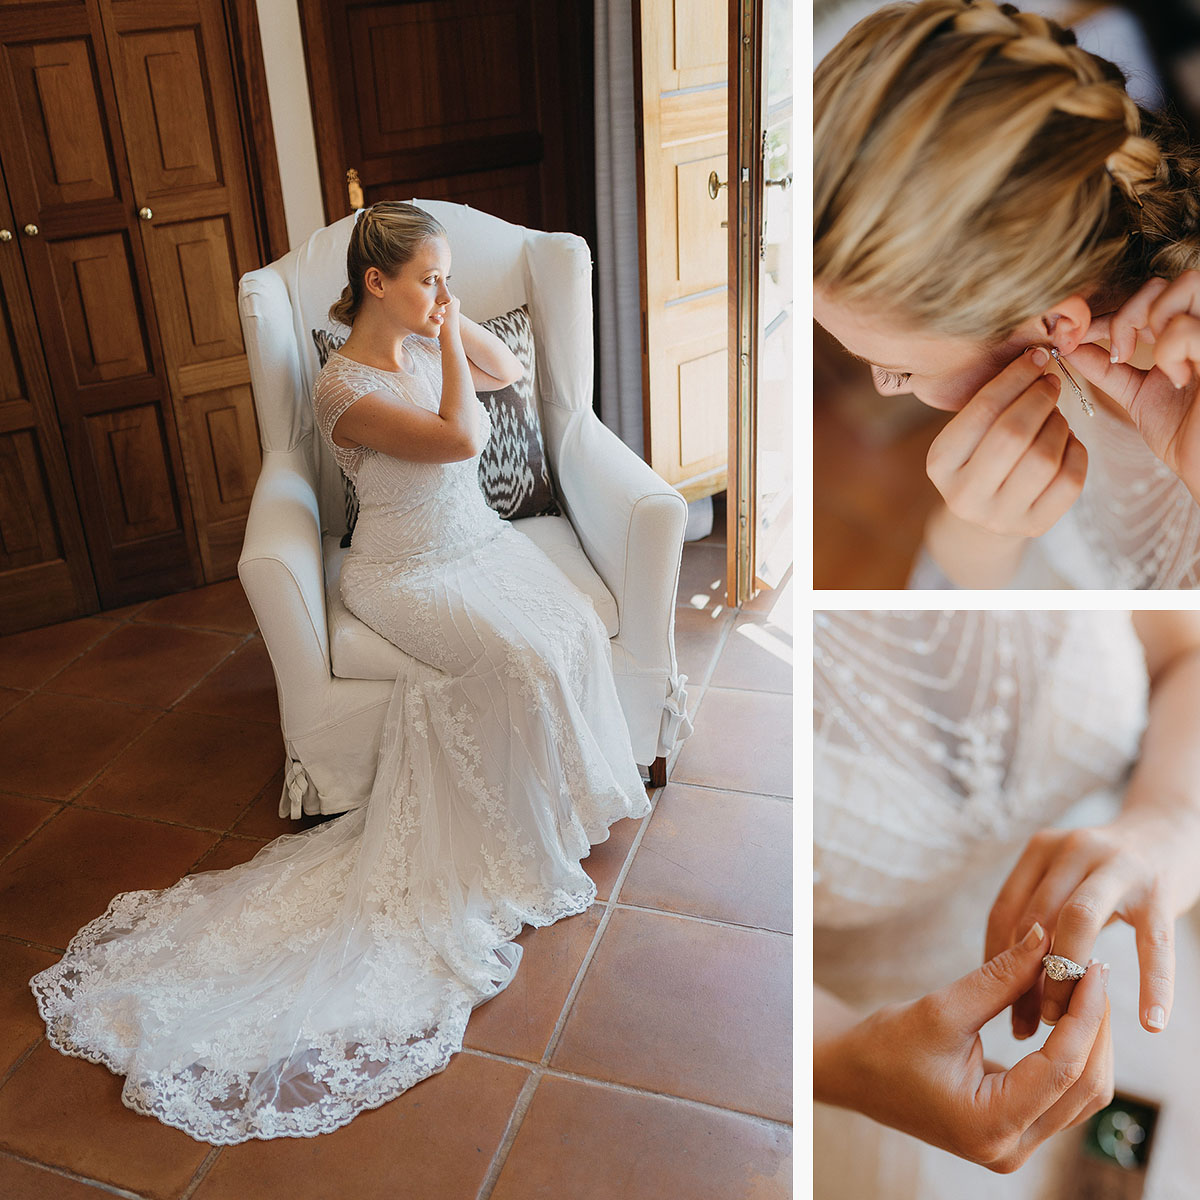 Spain elopement photography - bride at final steps of getting ready for her wedding, ridal portraits before the ceremony